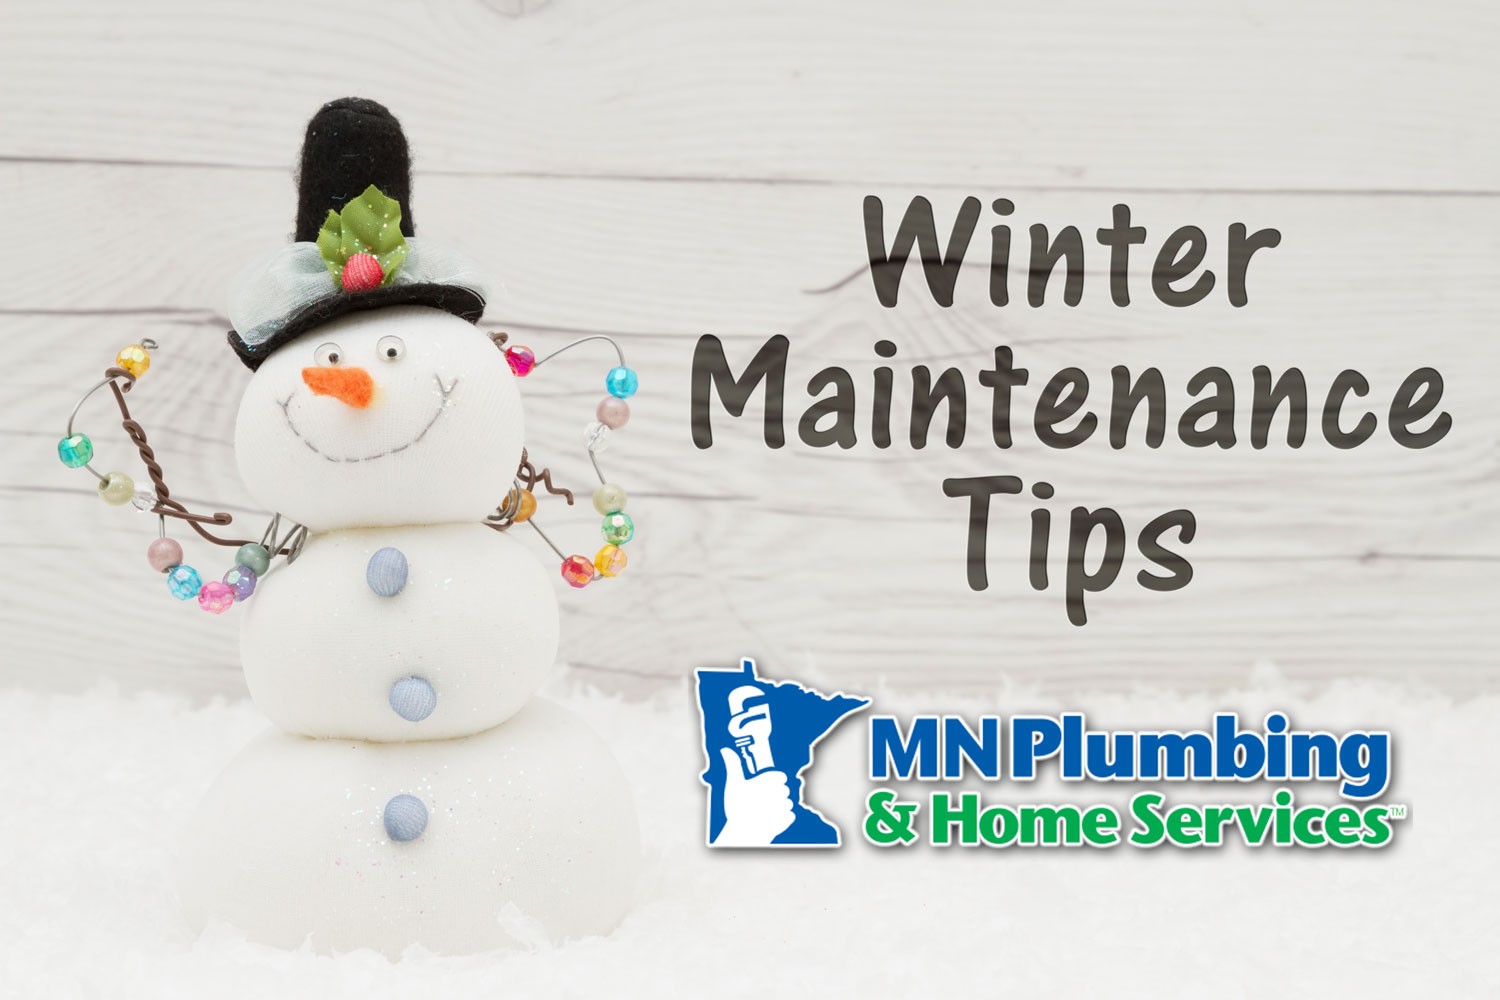 Snowman decorated with MN Plumbing and Home Services logo